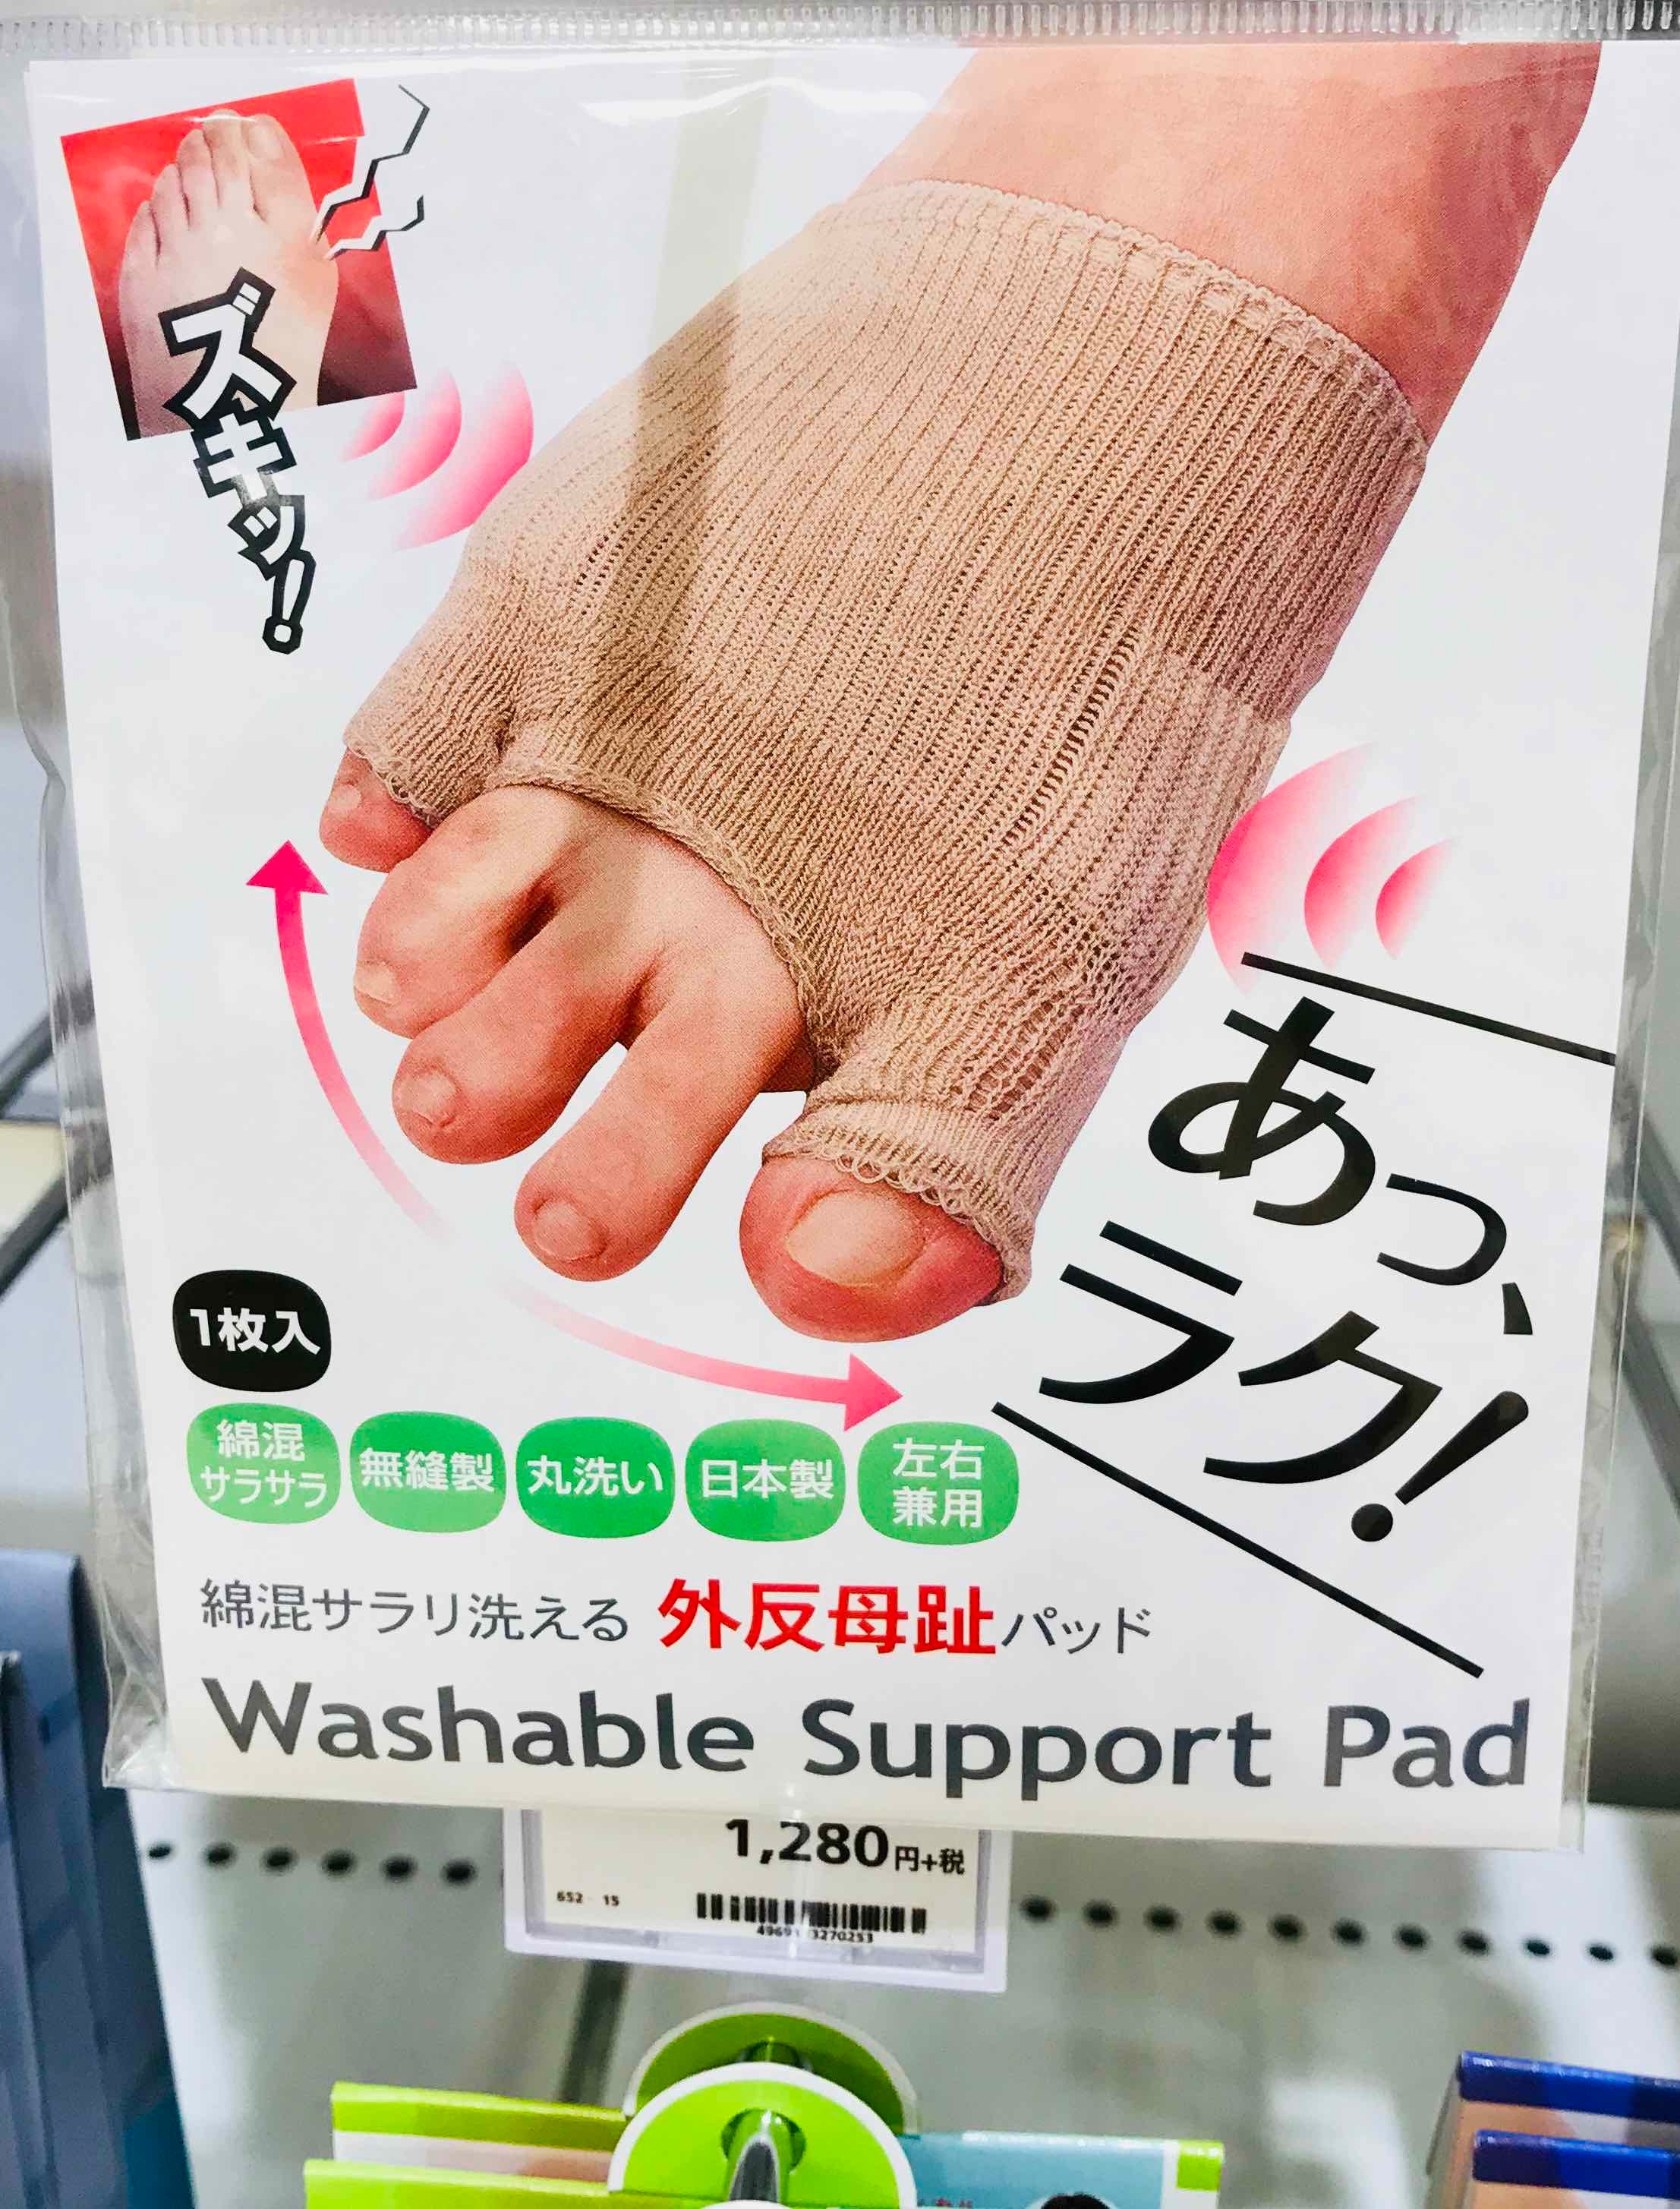 Washable bunion support